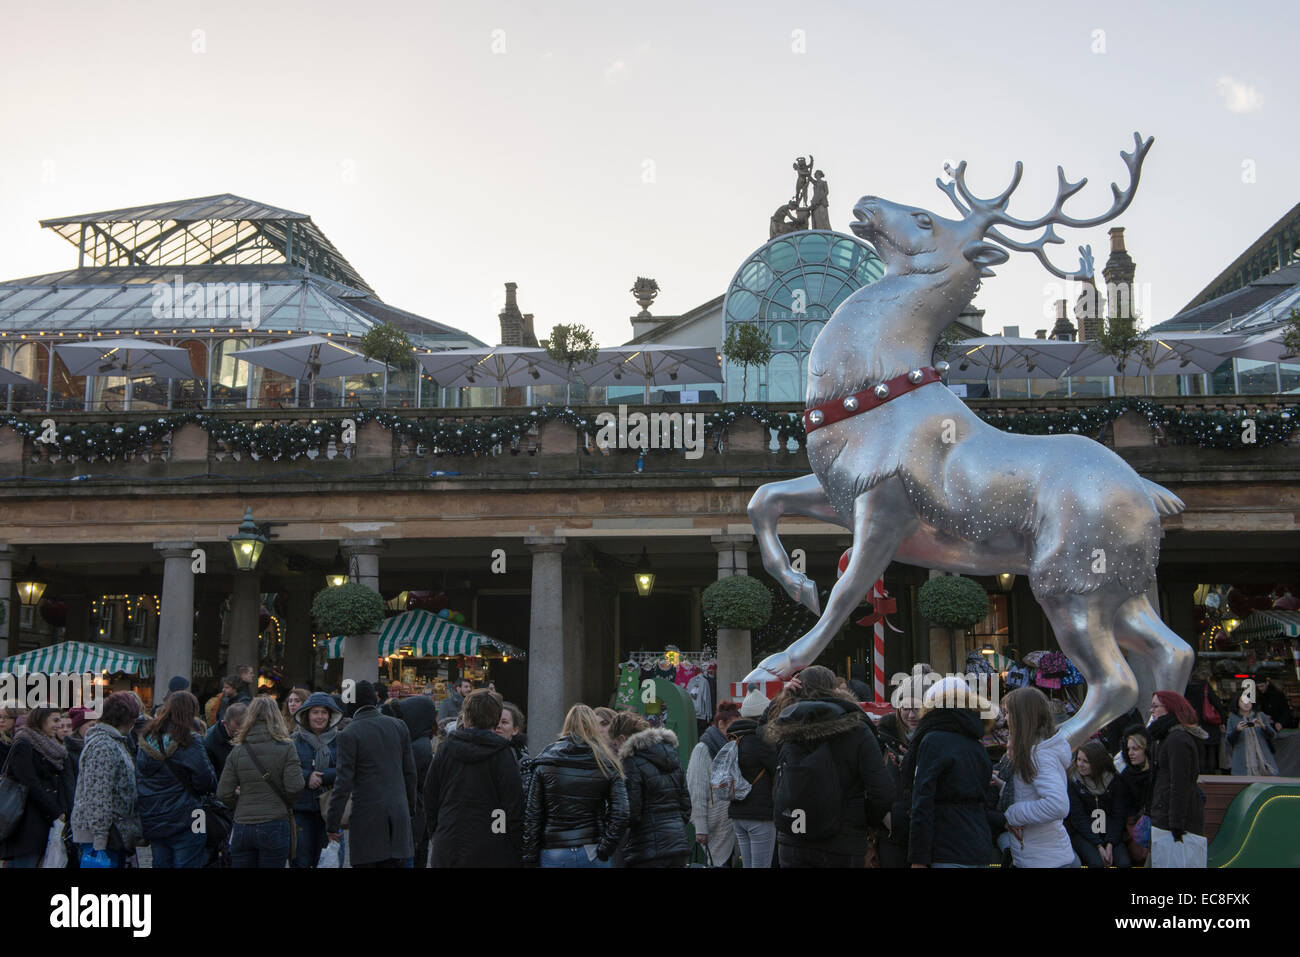 Tourists enjoying the Christmas decorations at Covent Garden, London, England. December 2014 Stock Photo